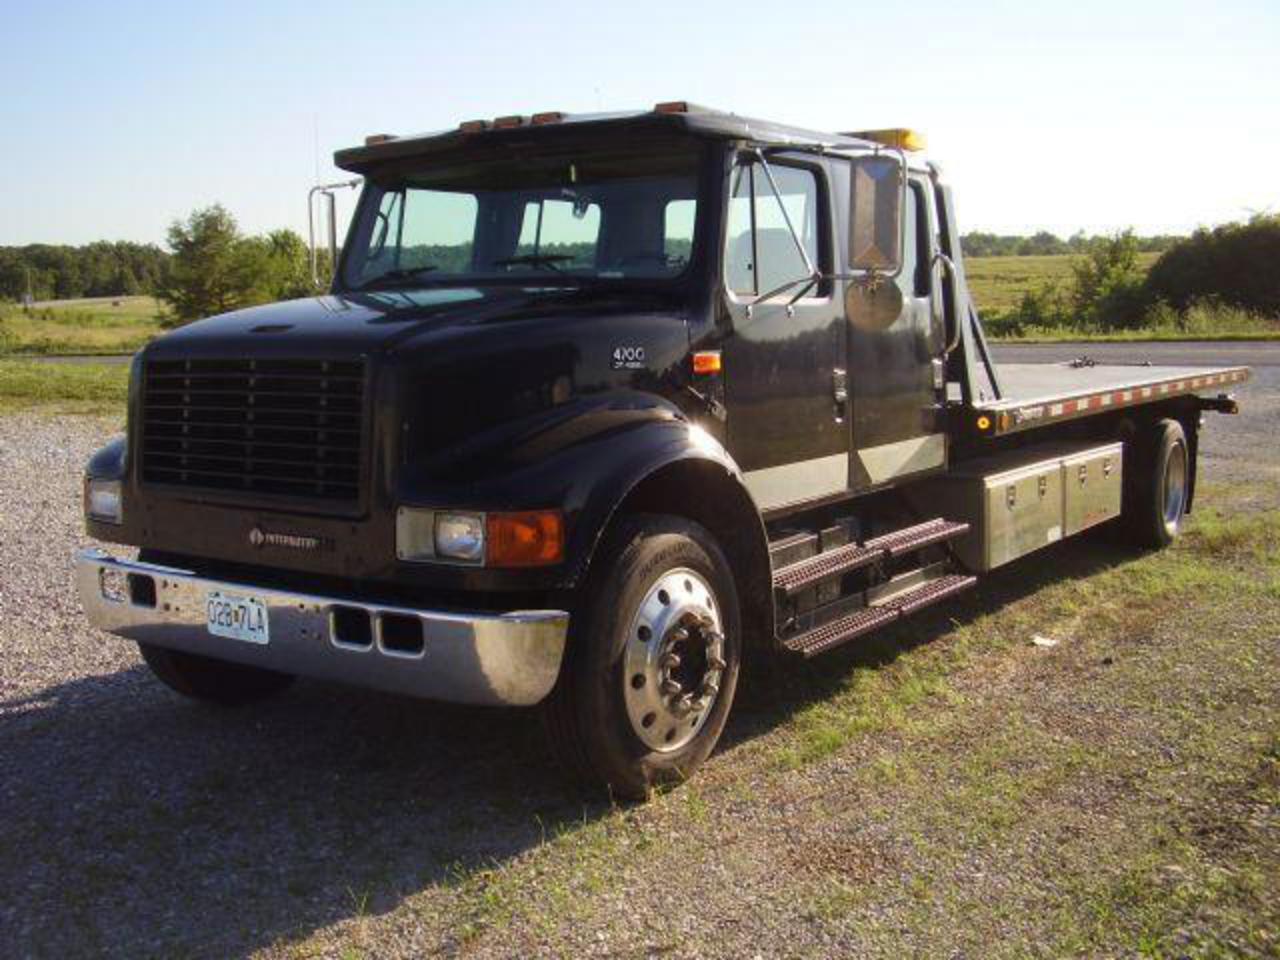 1996 International 4900, Used Cars For Sale - Carsforsale.